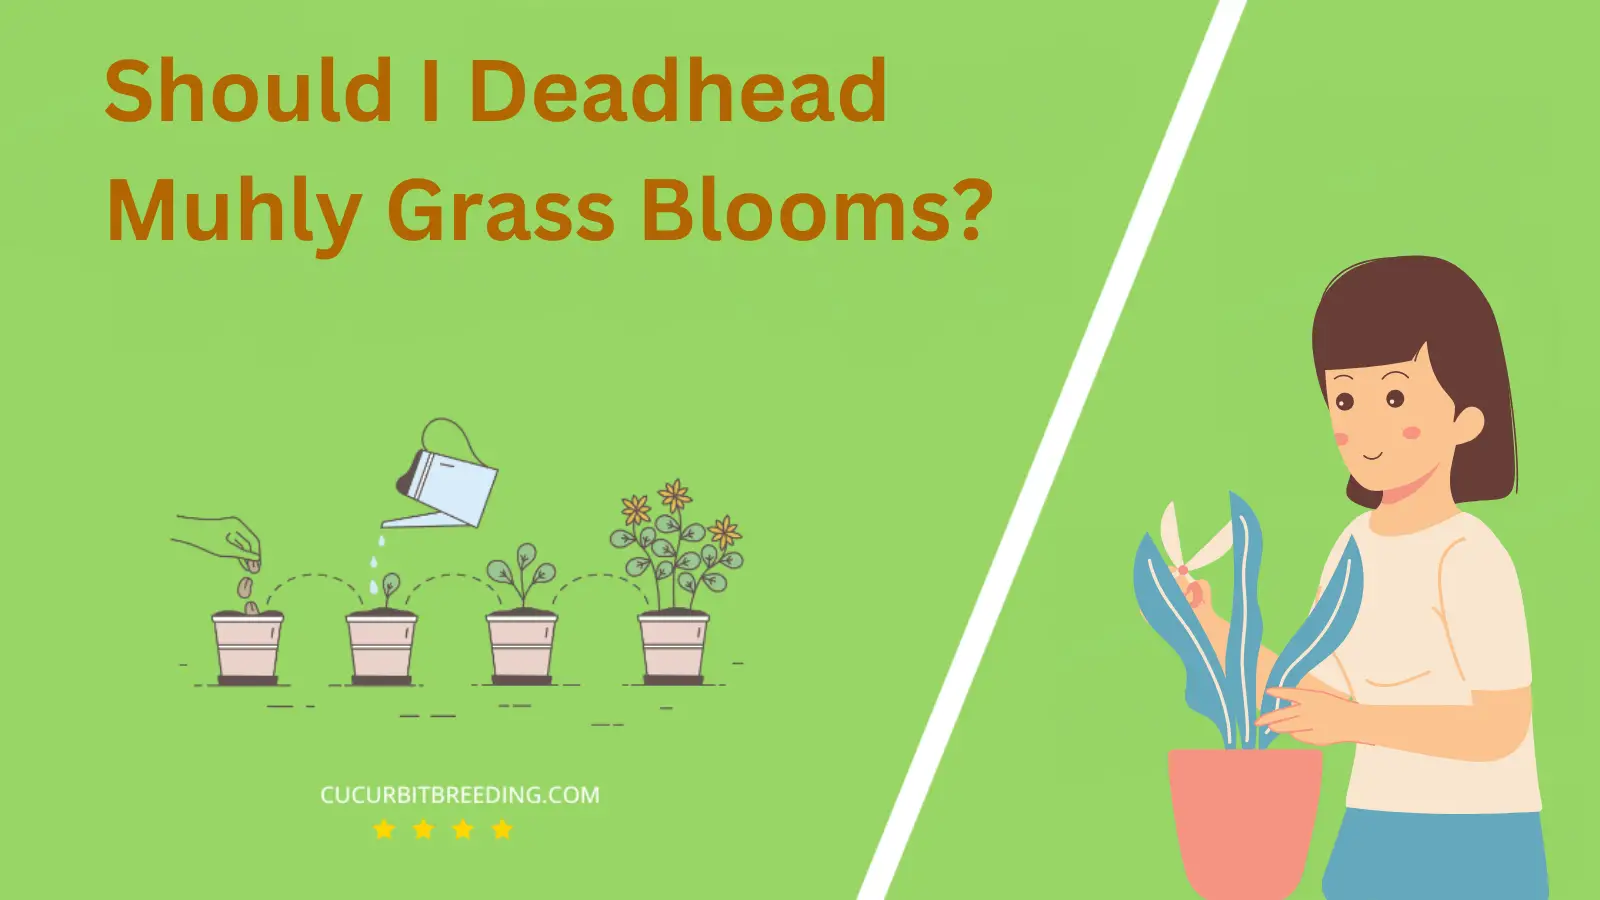 Should I Deadhead Muhly Grass Blooms?